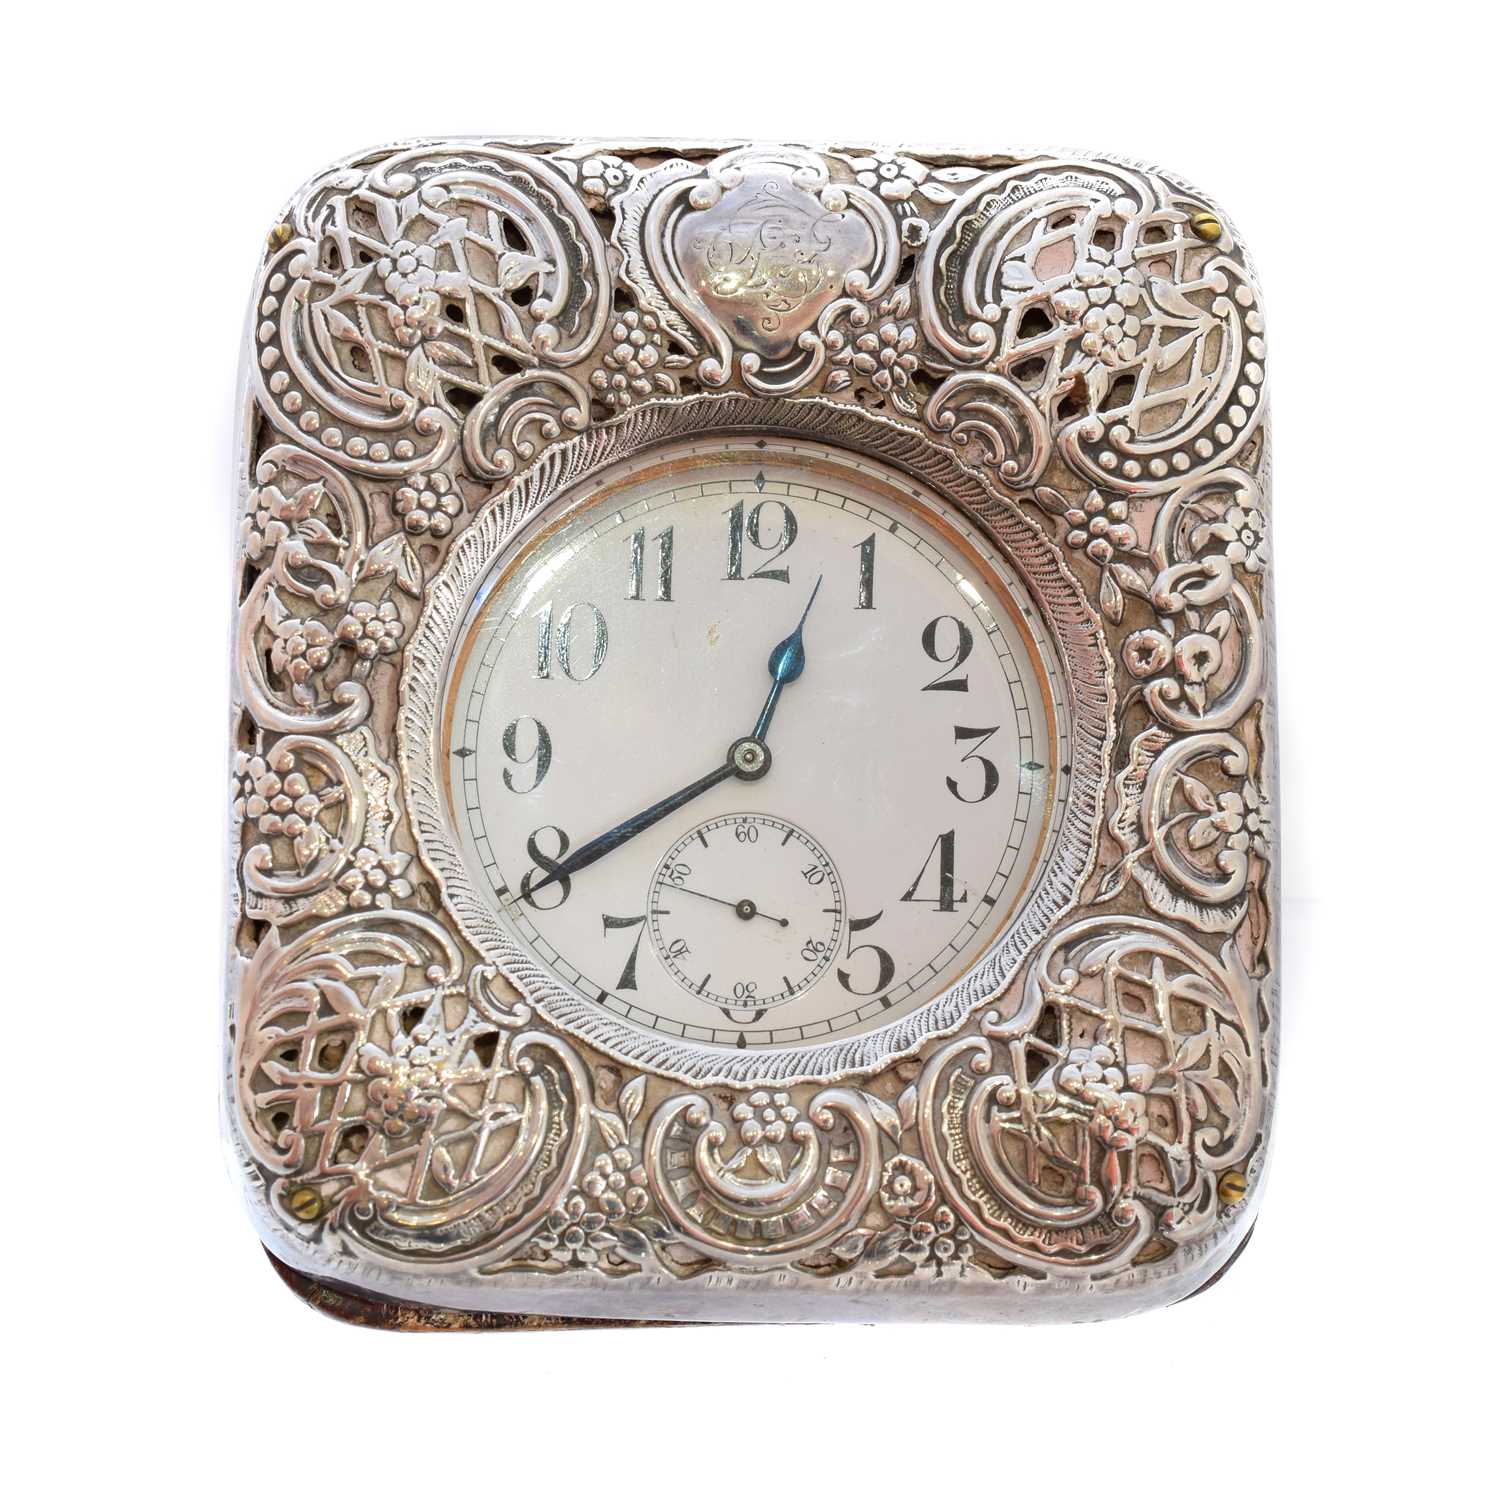 Lot 120 - A goliath pocket watch within a silver fronted case